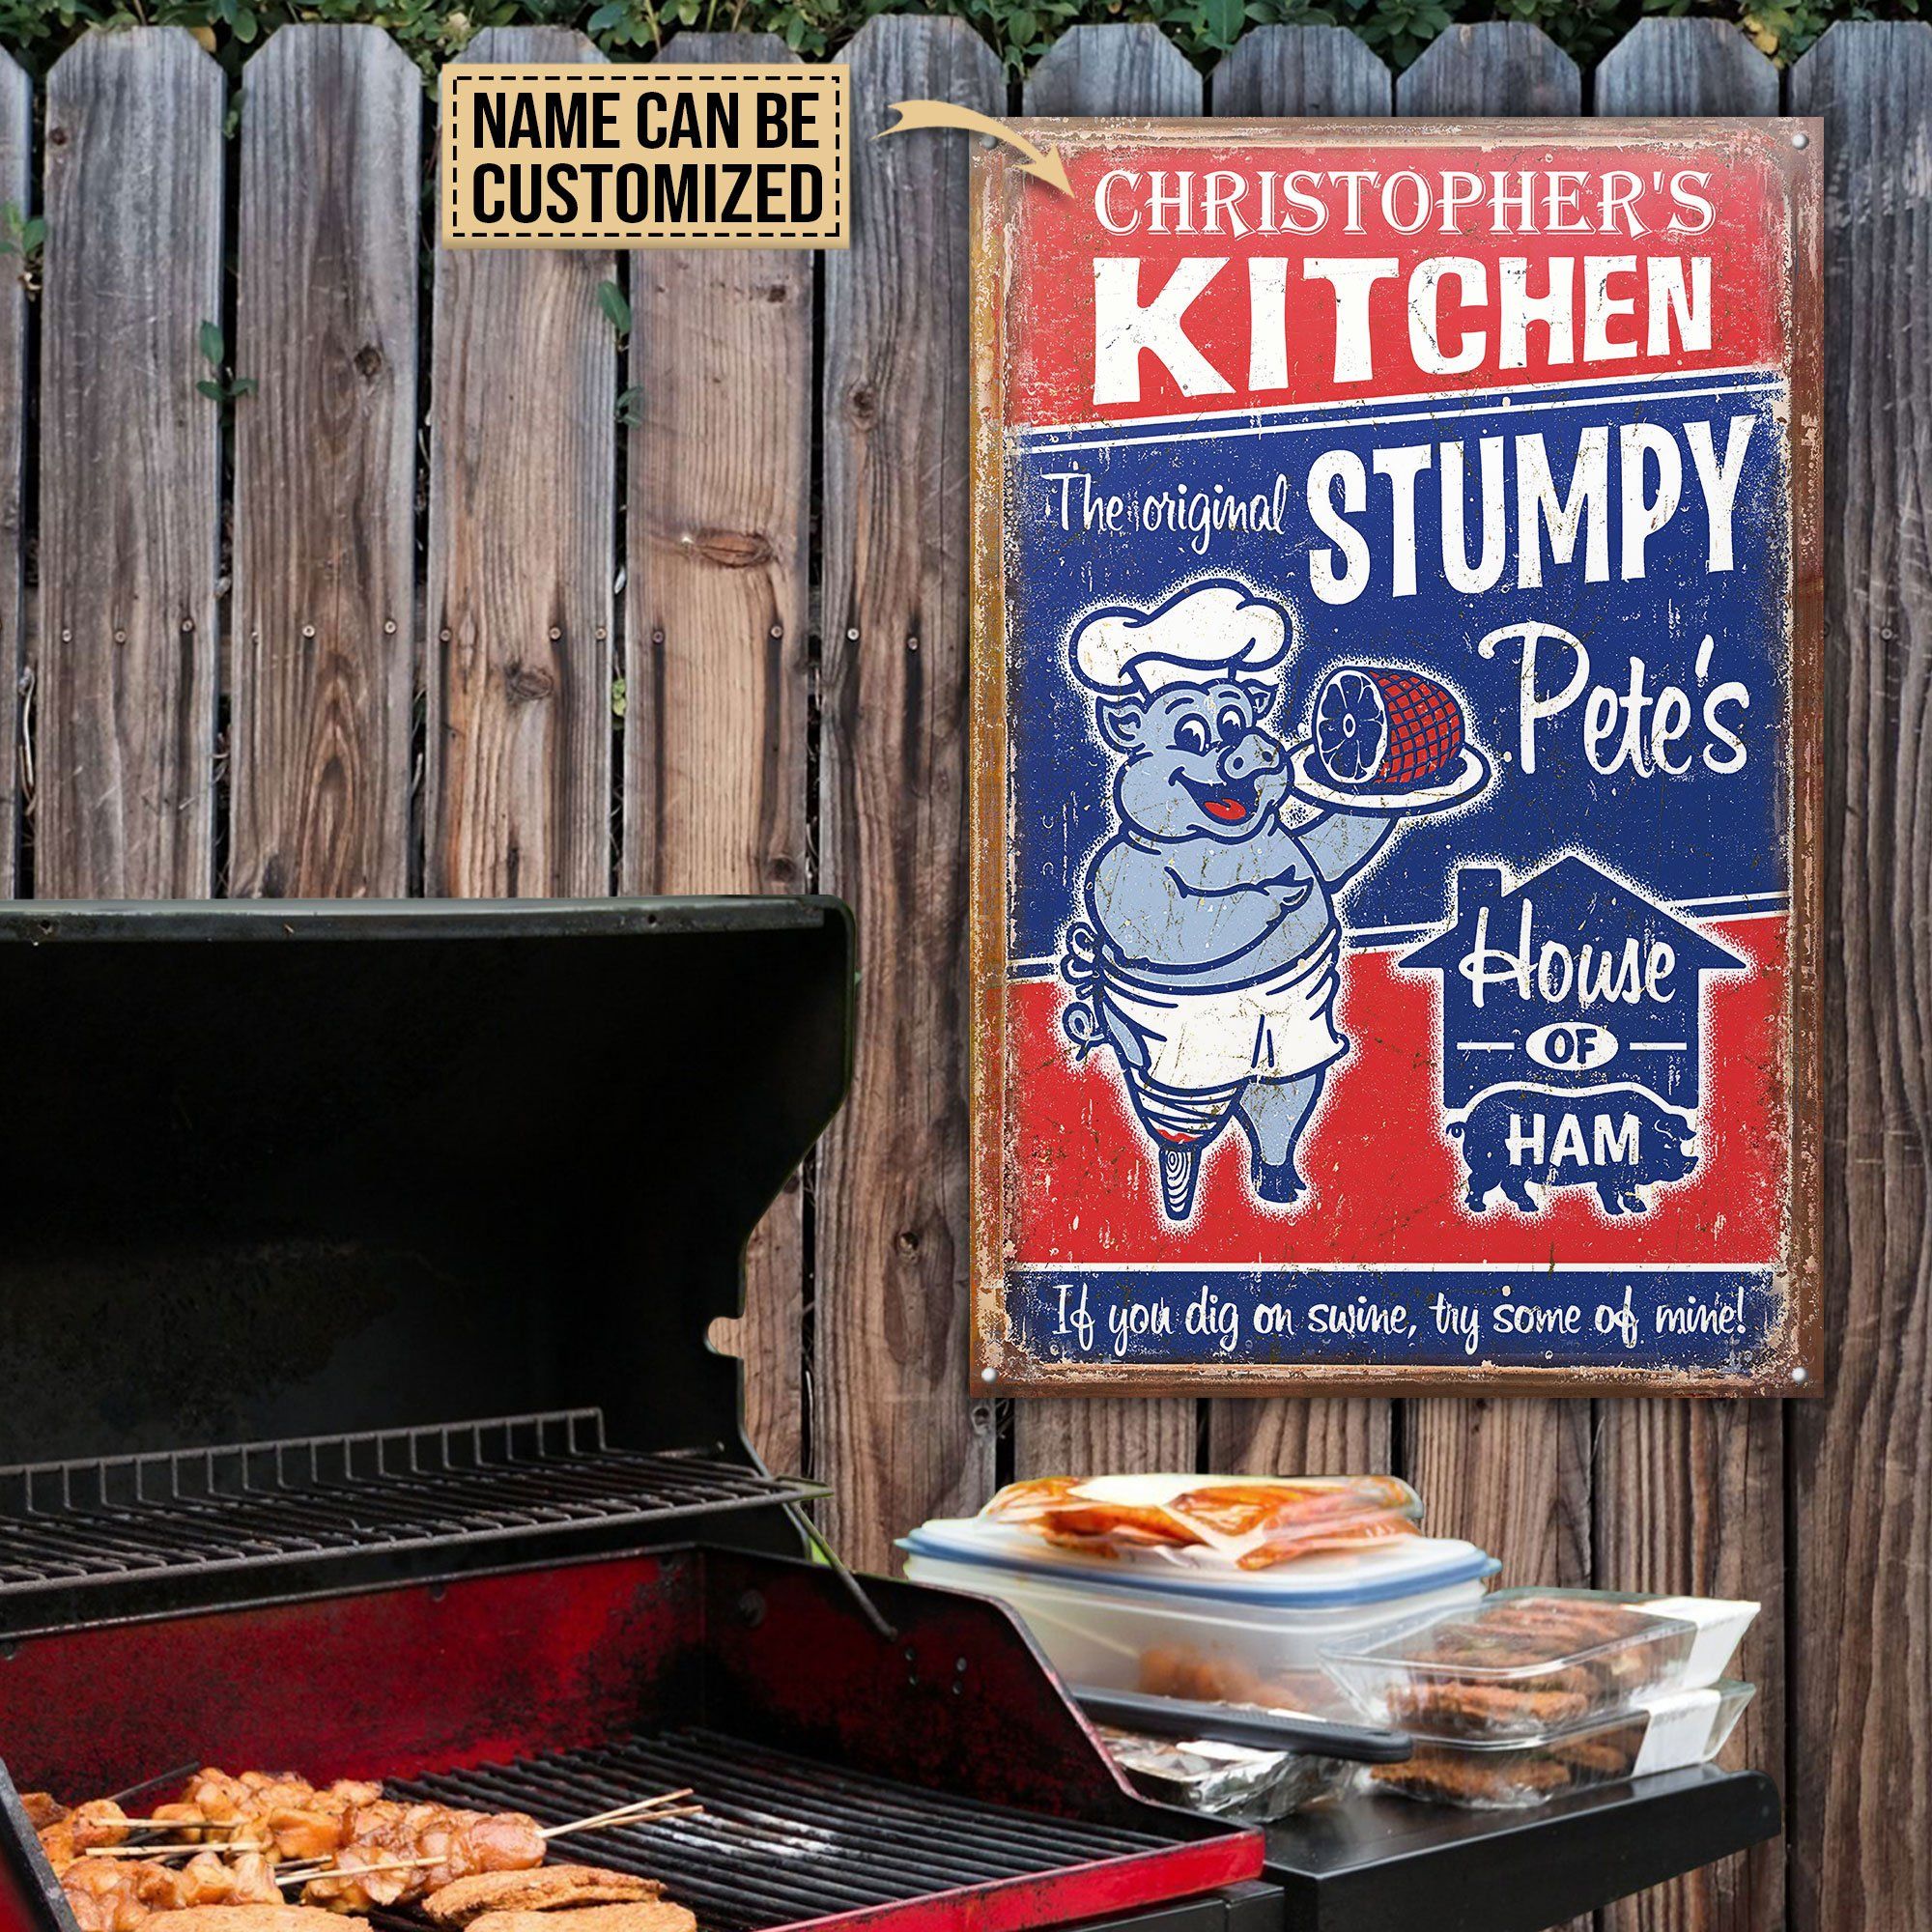 Personalized Grilling Stumpy Pete's Ham Customized Classic Metal Signs